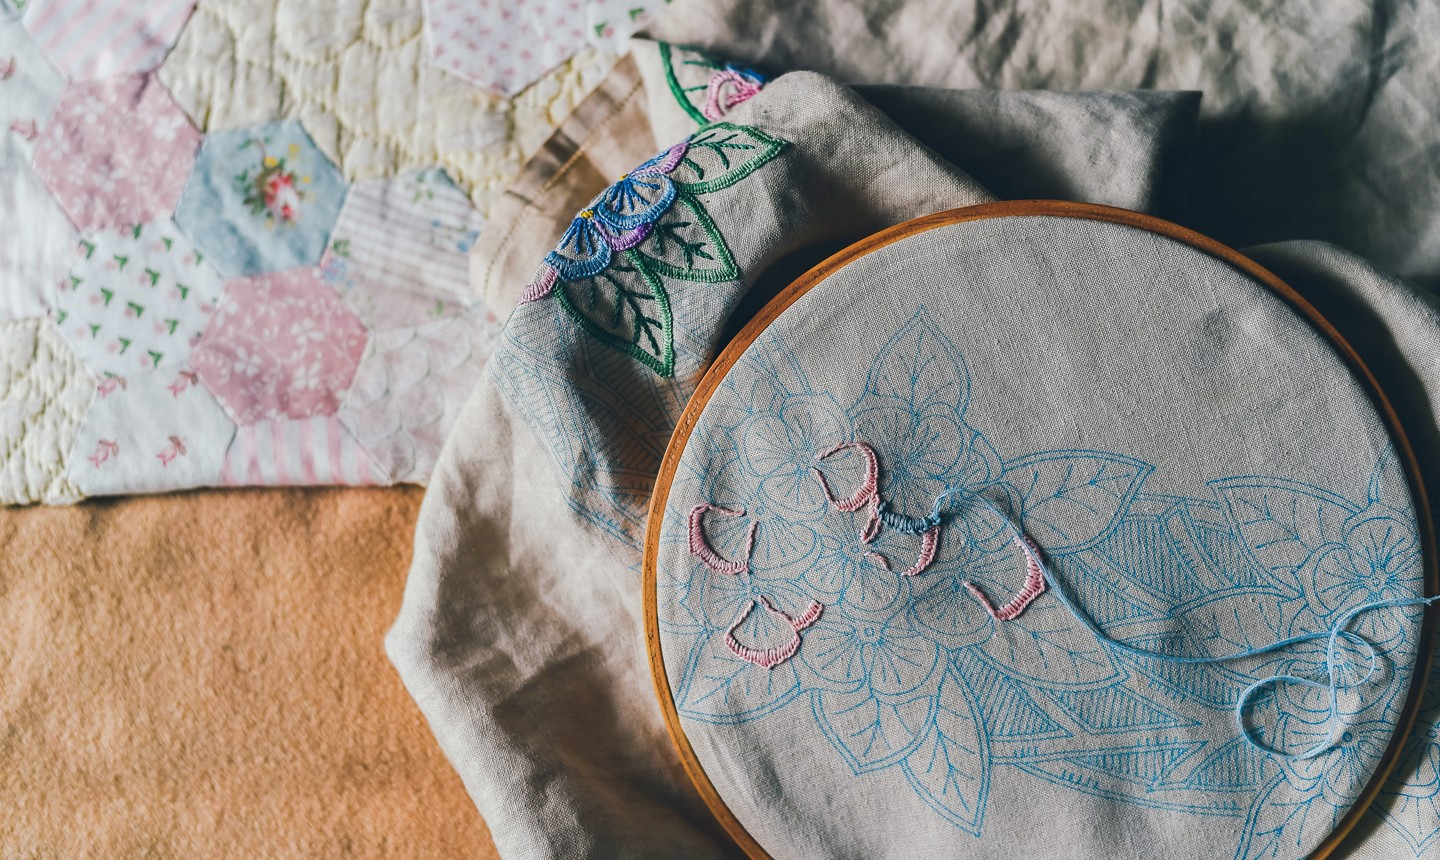 Paper Embroidery Patterns Free 5 Simple Ways To Transfer Embroidery Designs